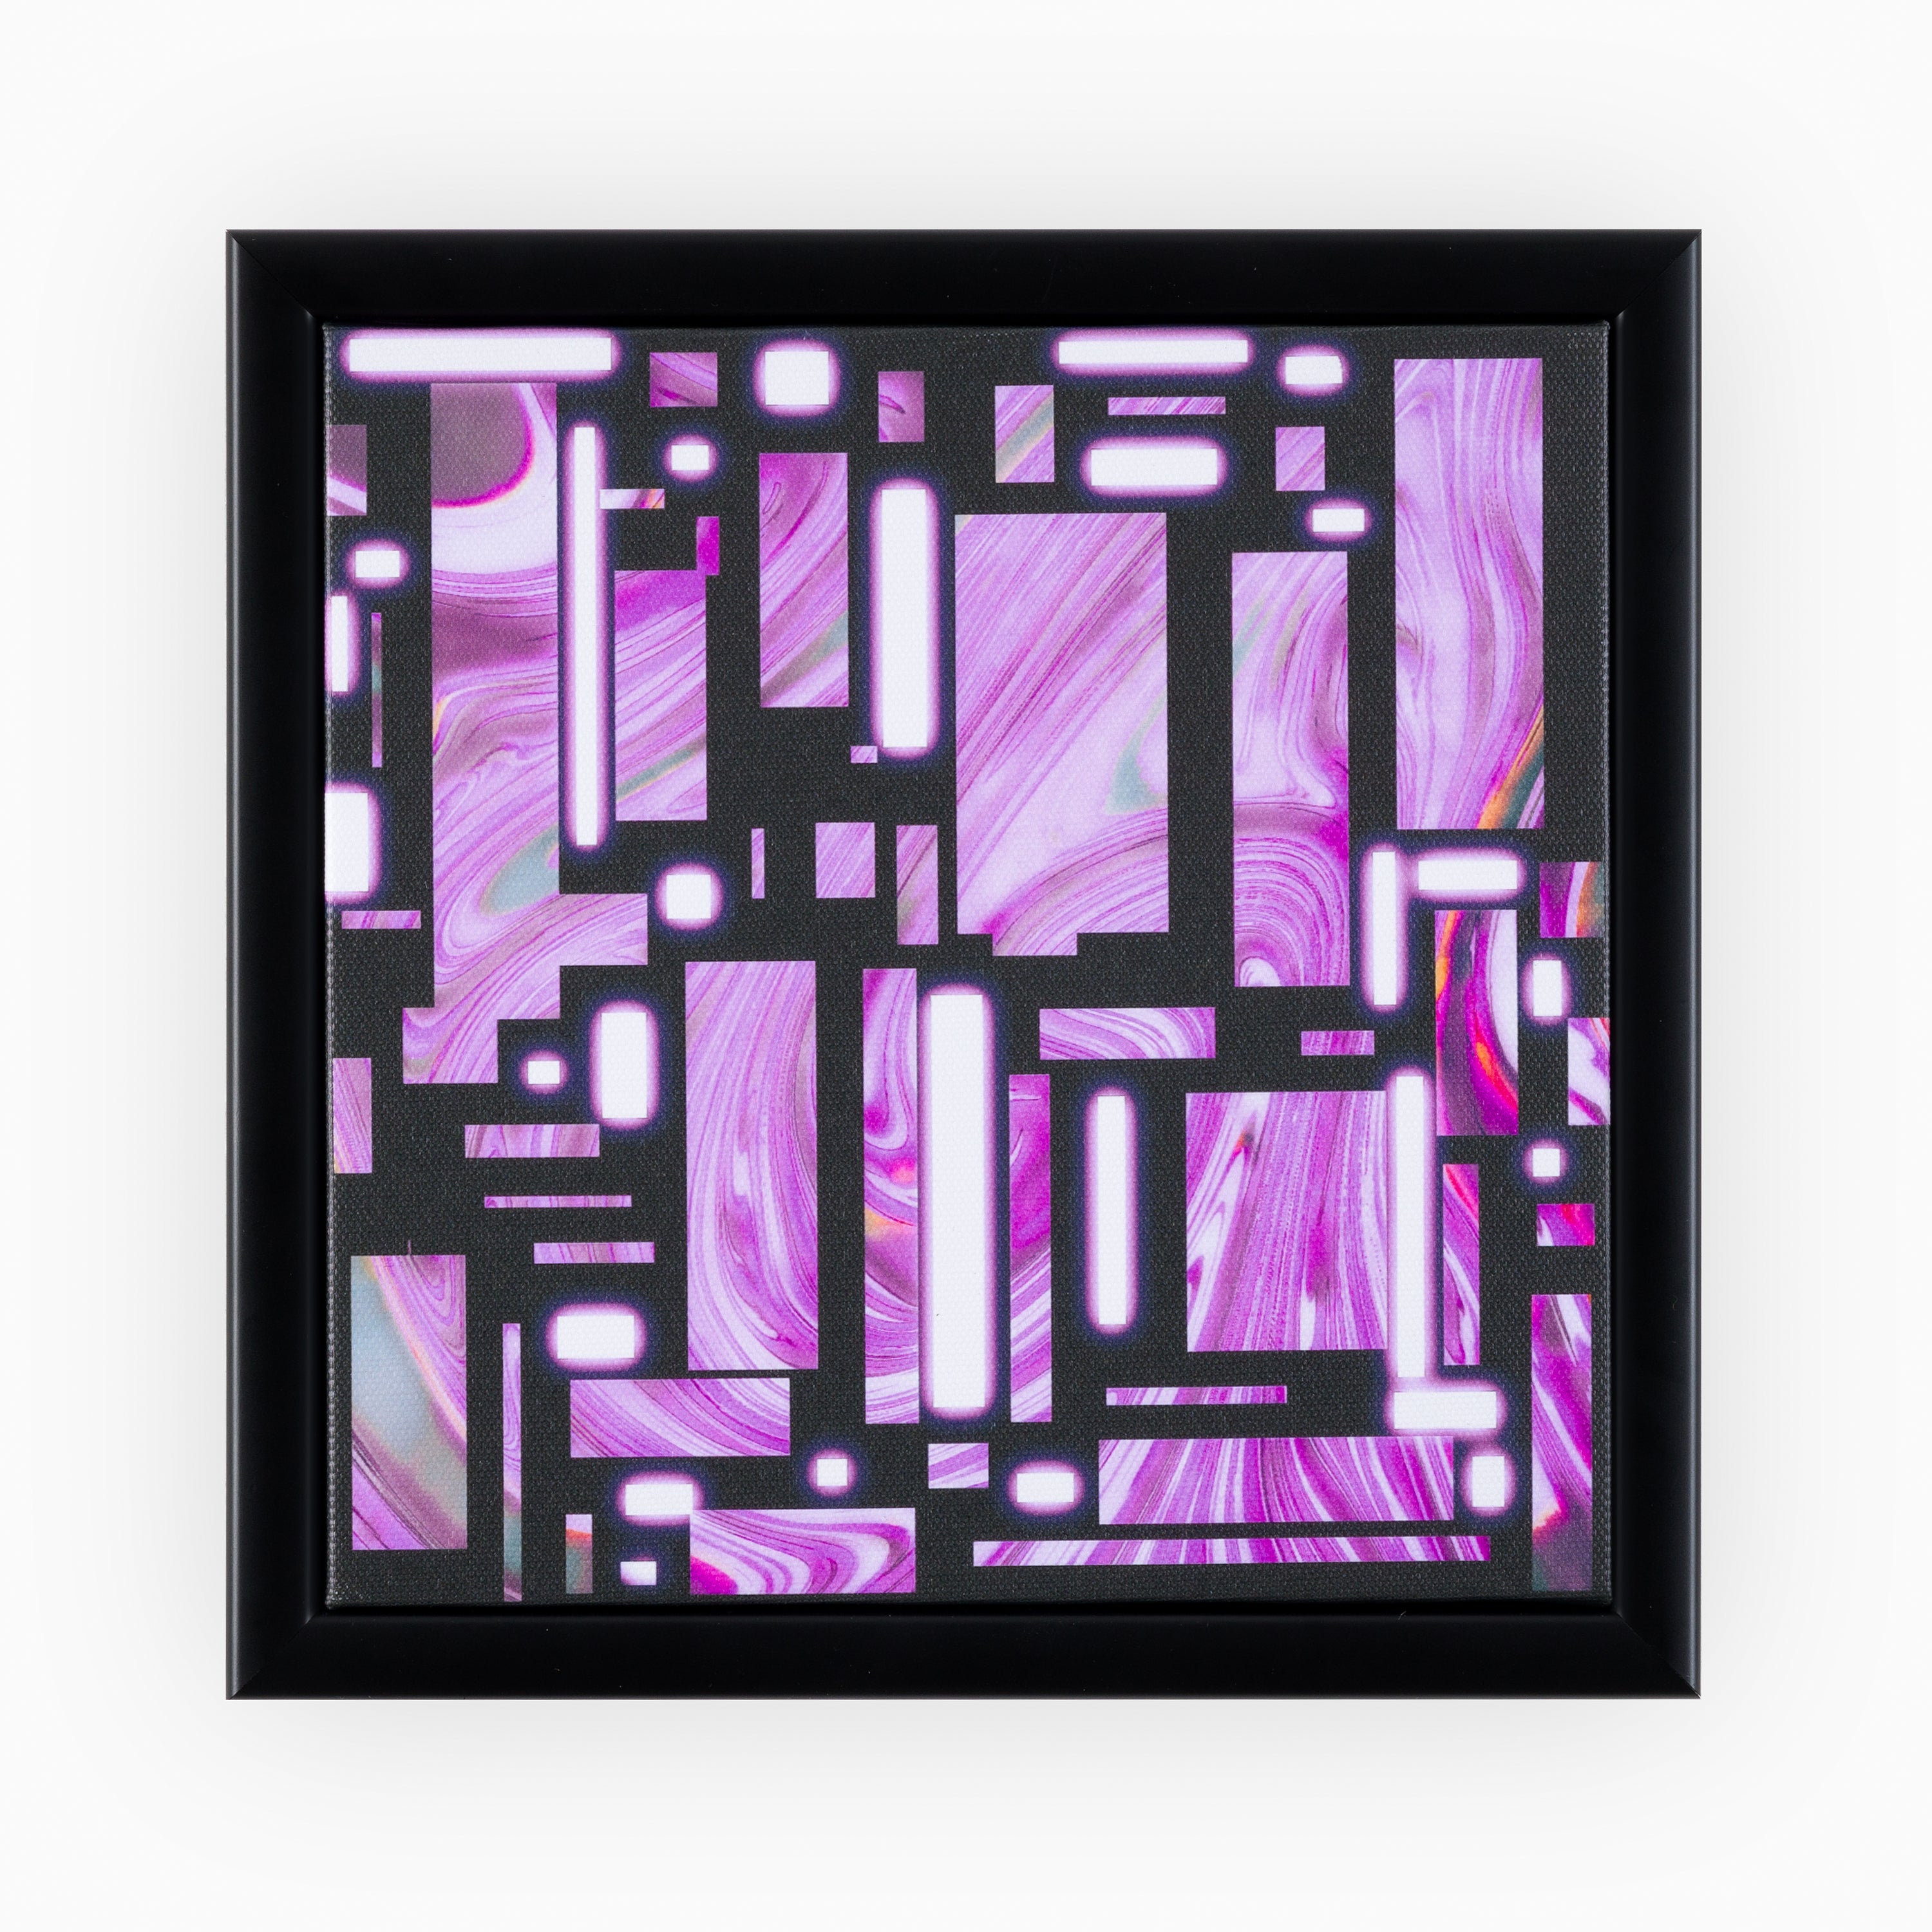 Artisanal abstract canvas art featuring a geometric lattice design over a swirling marbled pattern in shades of purple green and white - all encased in a classic black frame.